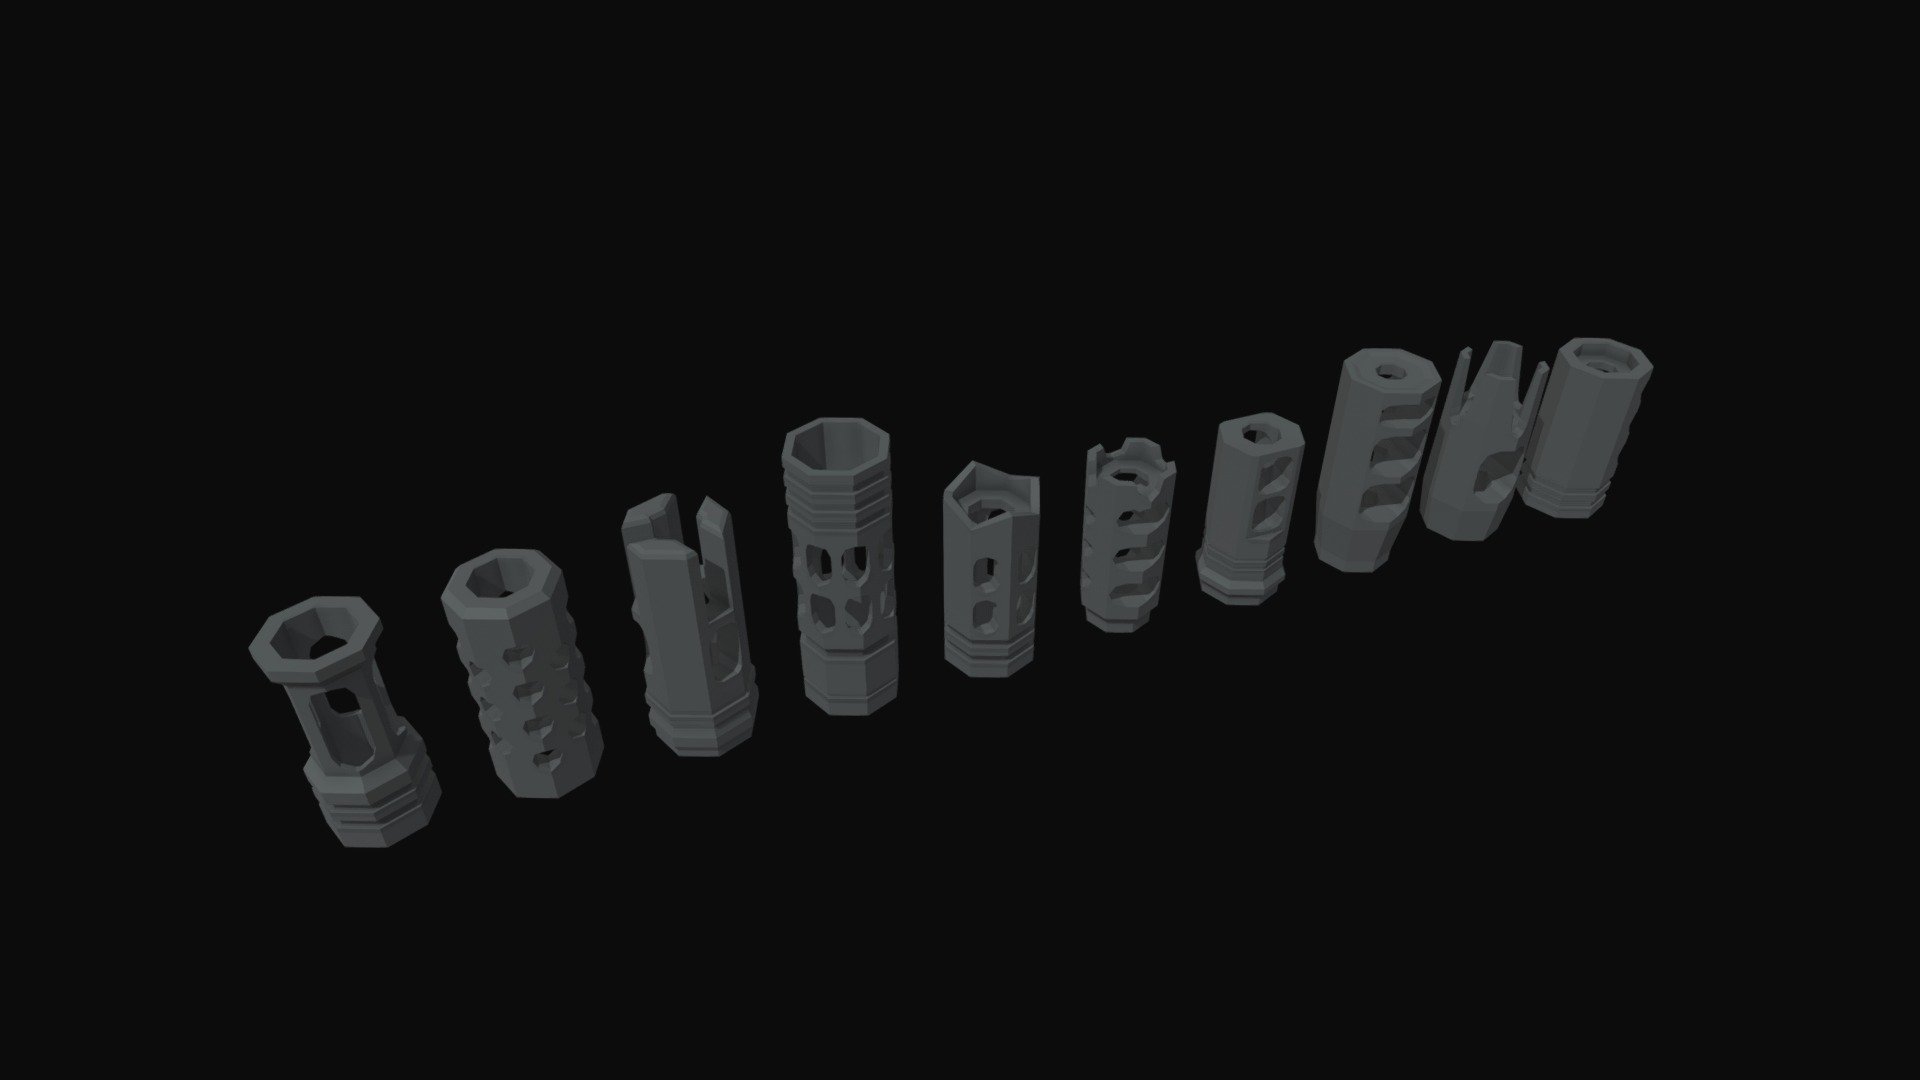 Pack of 11 low poly compensators

Ready for use in games - Tested in unity

Be sure to download the &ldquo;Aditional File